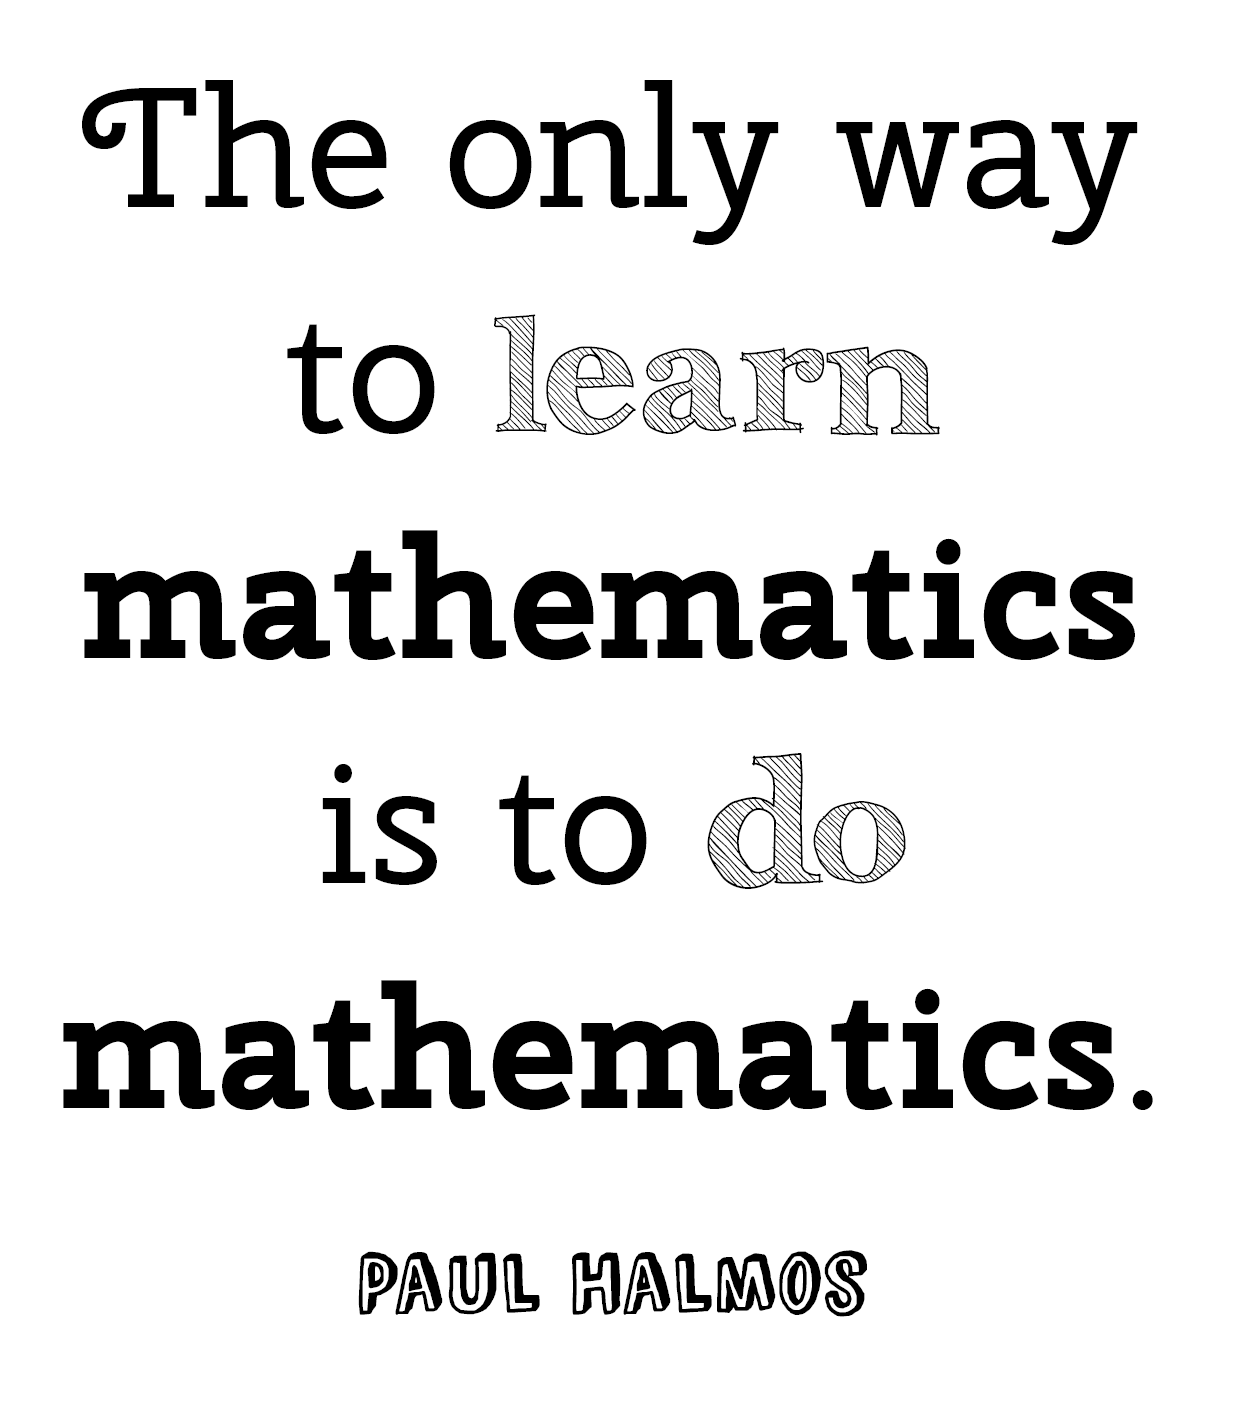 The only way to learn mathematics is to do mathematics. Paul Halmos